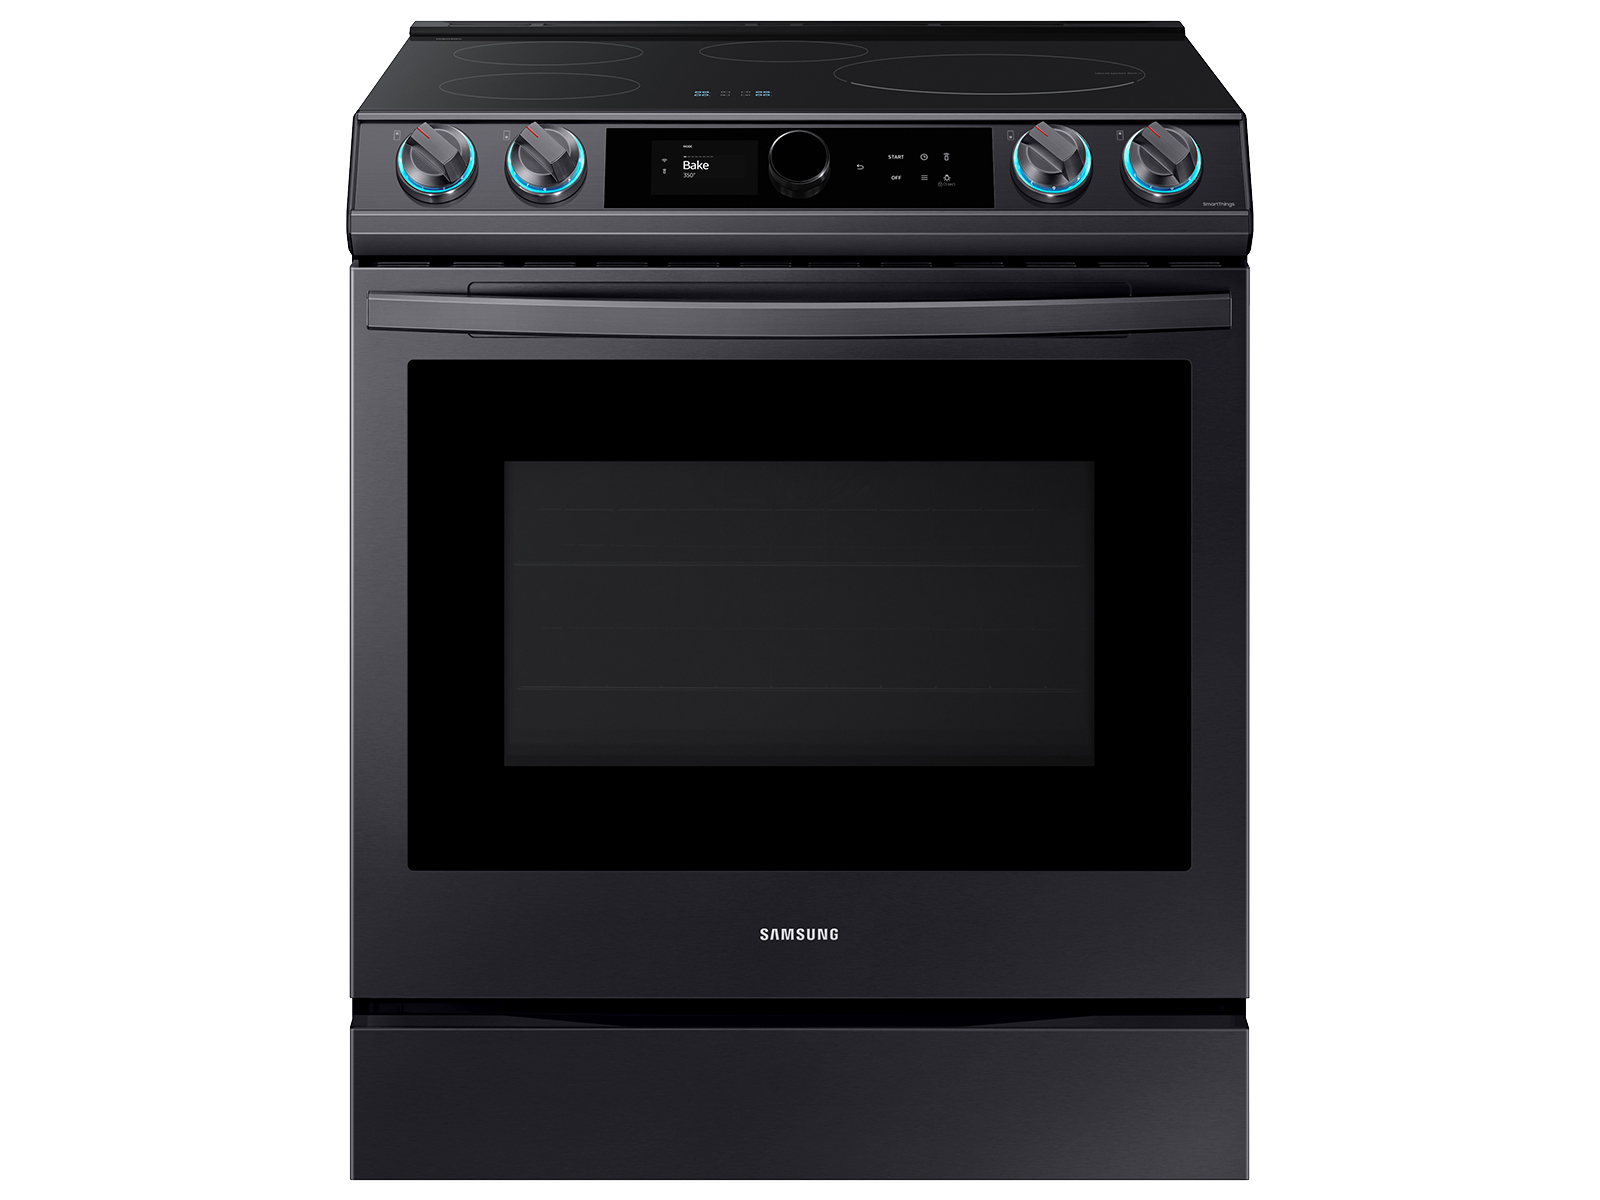 Samsung 6.3 cu. ft. Smart Slide-induction Range with Smart Dial & Air Fry in Black Stainless Steel(NE63T8911SG/AA)